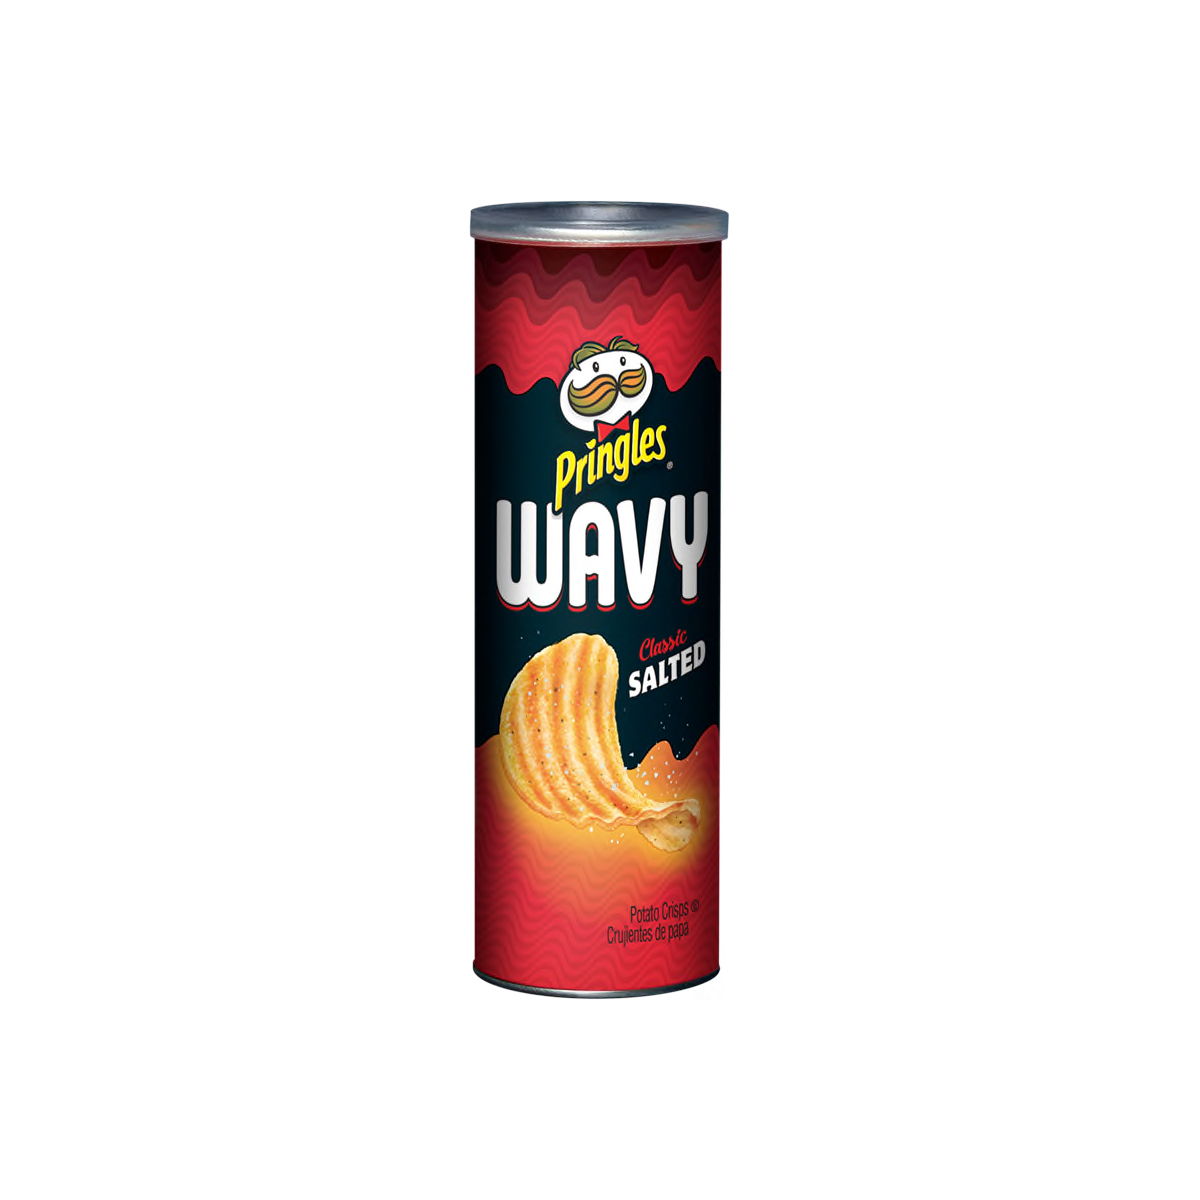 Pringles Wavy Classic Salted.